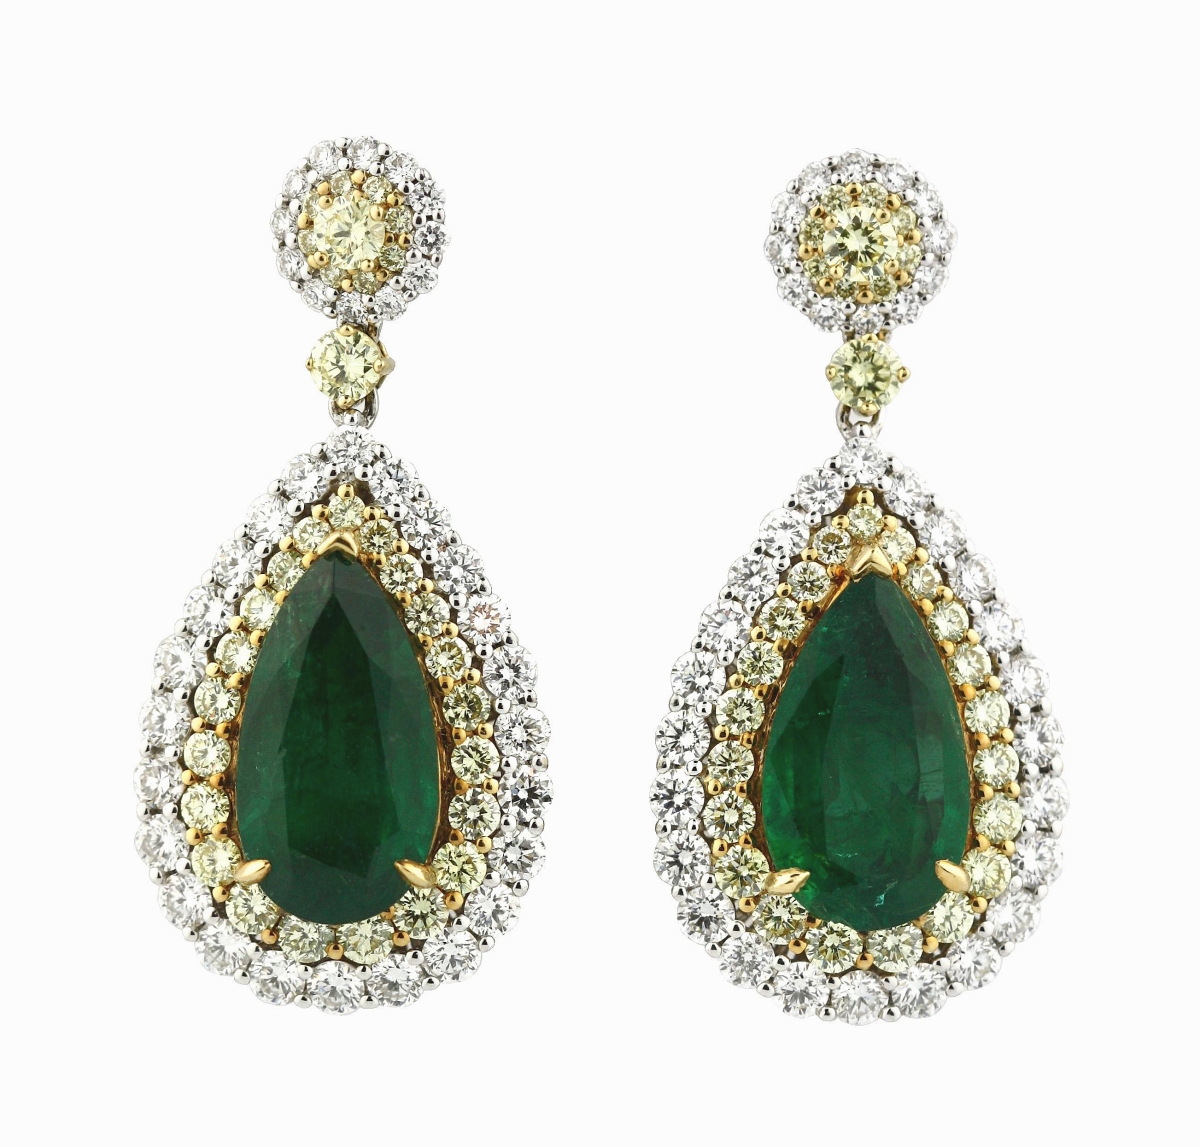 A Palm Beach buyer paid $18,000 for this pair of emerald and diamond earrings that was accompanied by a GIA report; it was the second highest price in the sale ($30/50,000).